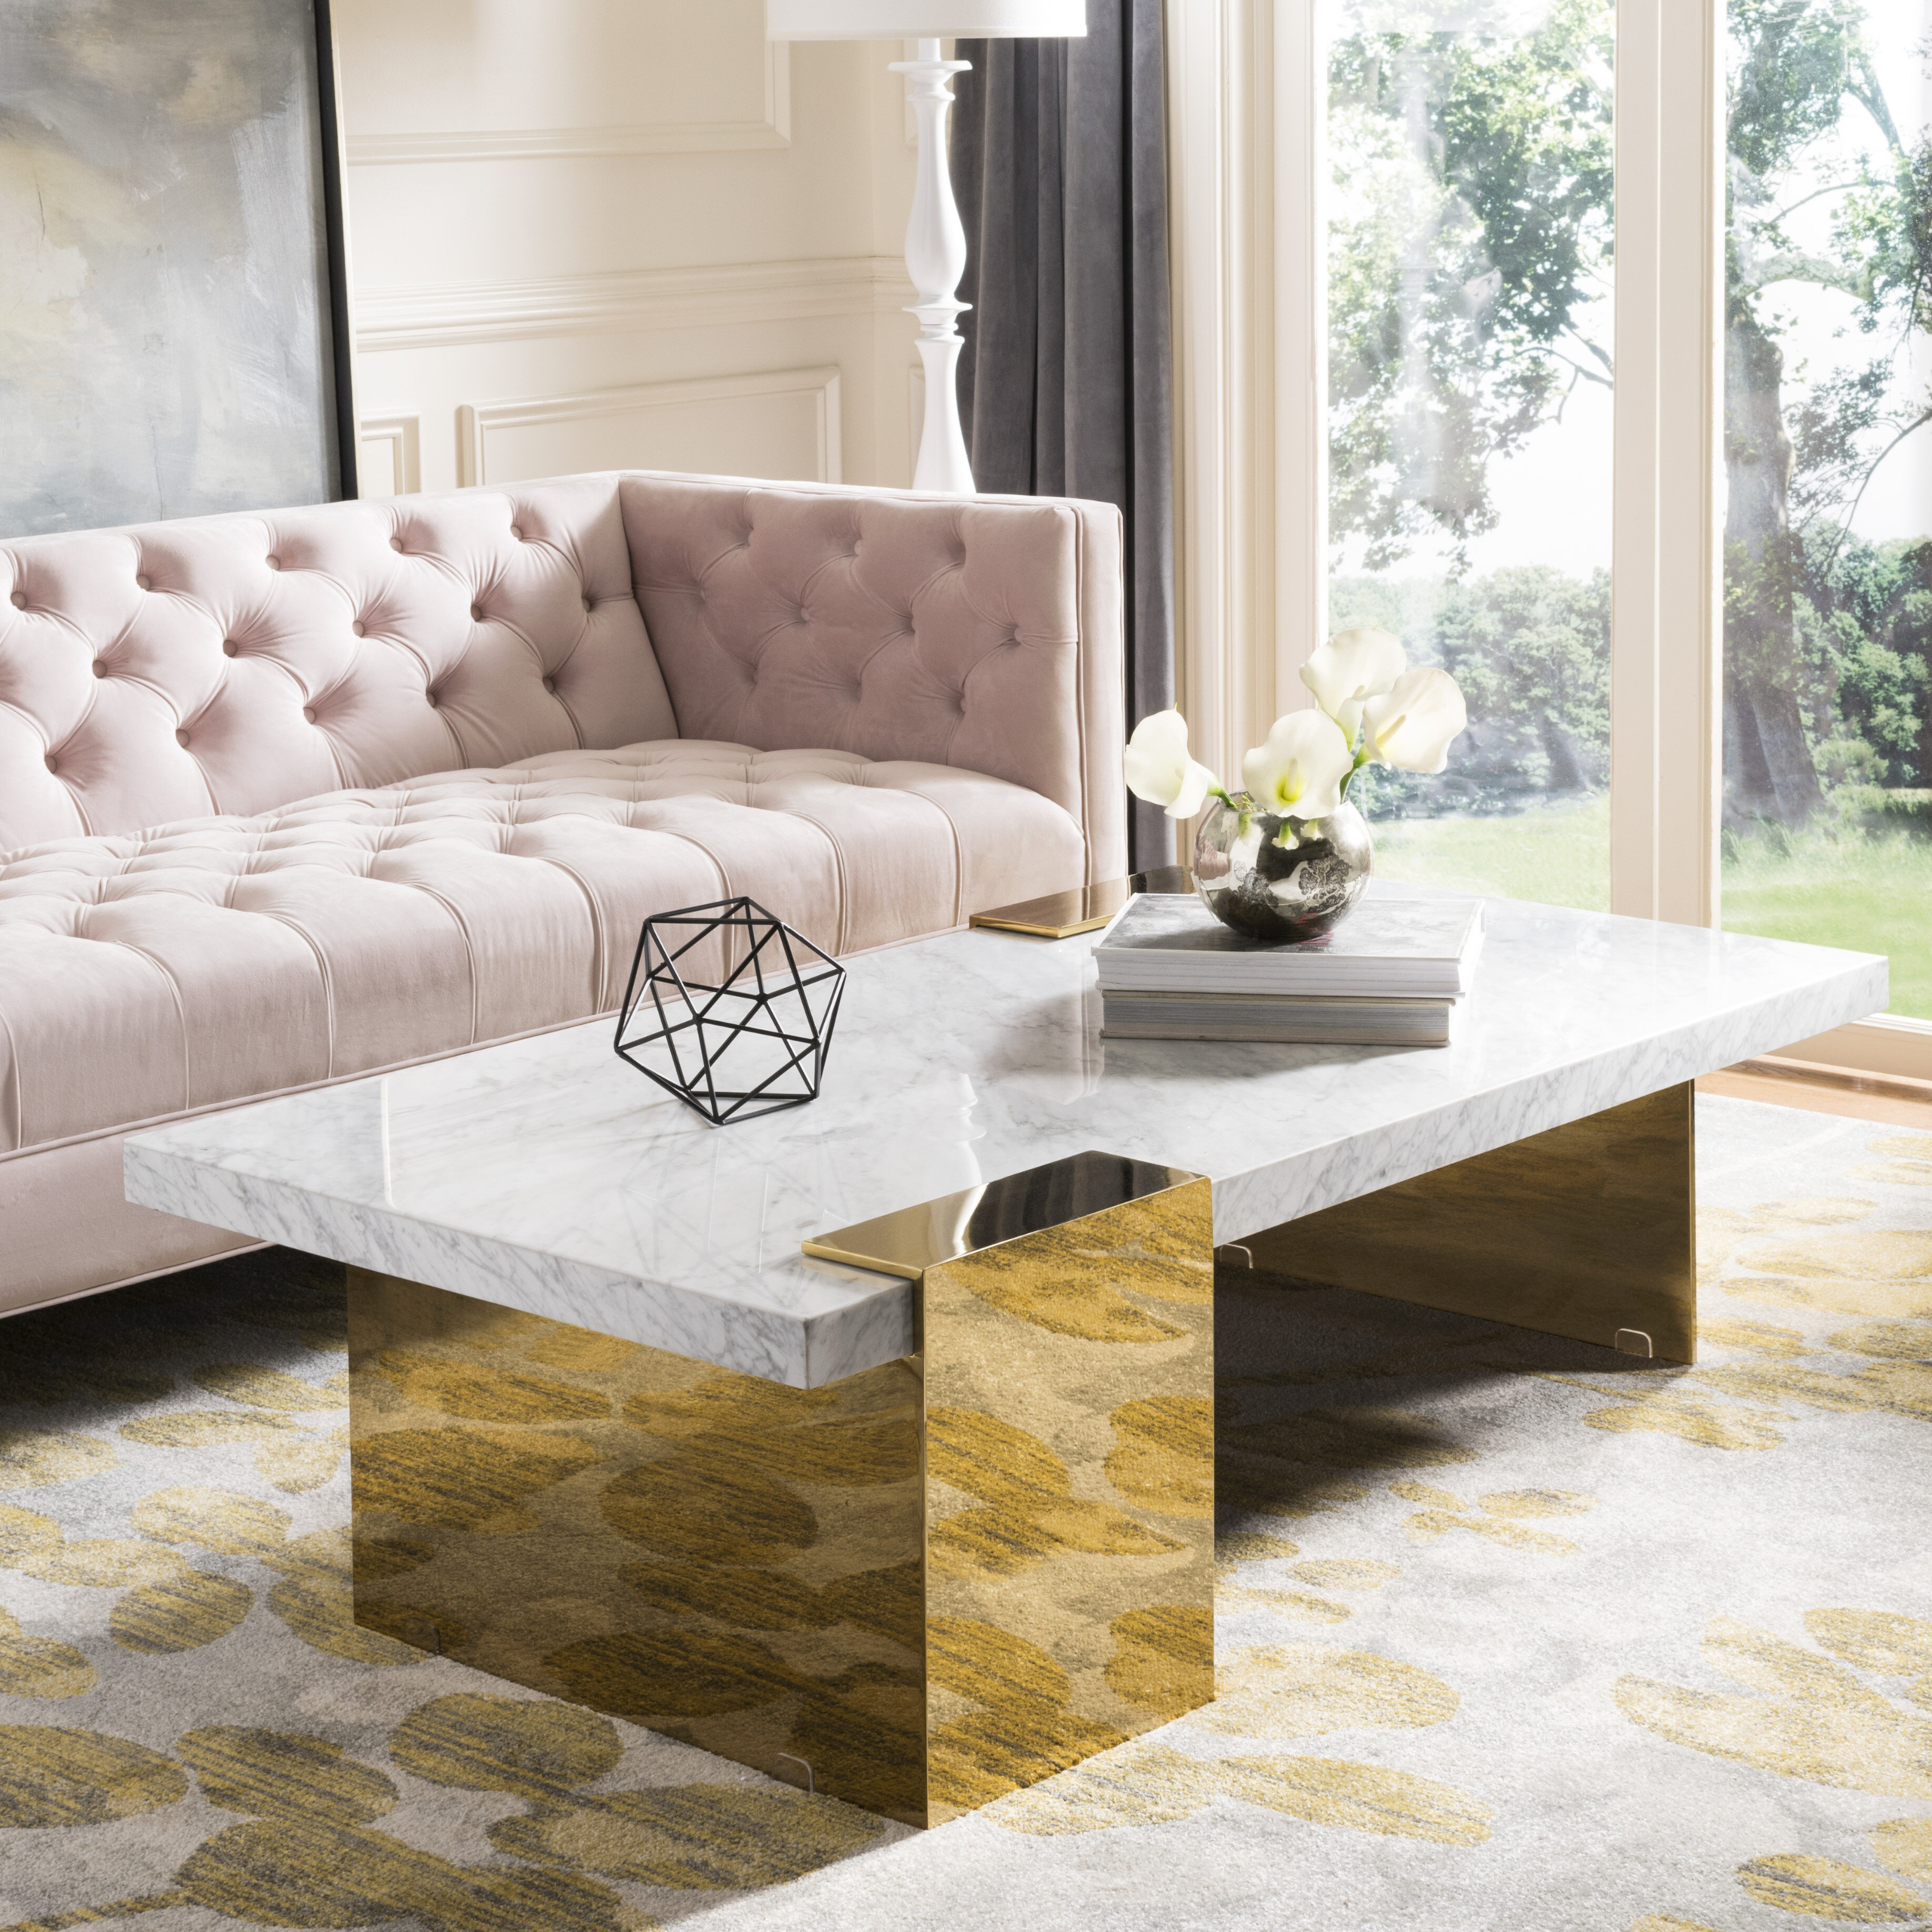 Faux White Marble Coffee Table Youll Love In 2021 Visualhunt